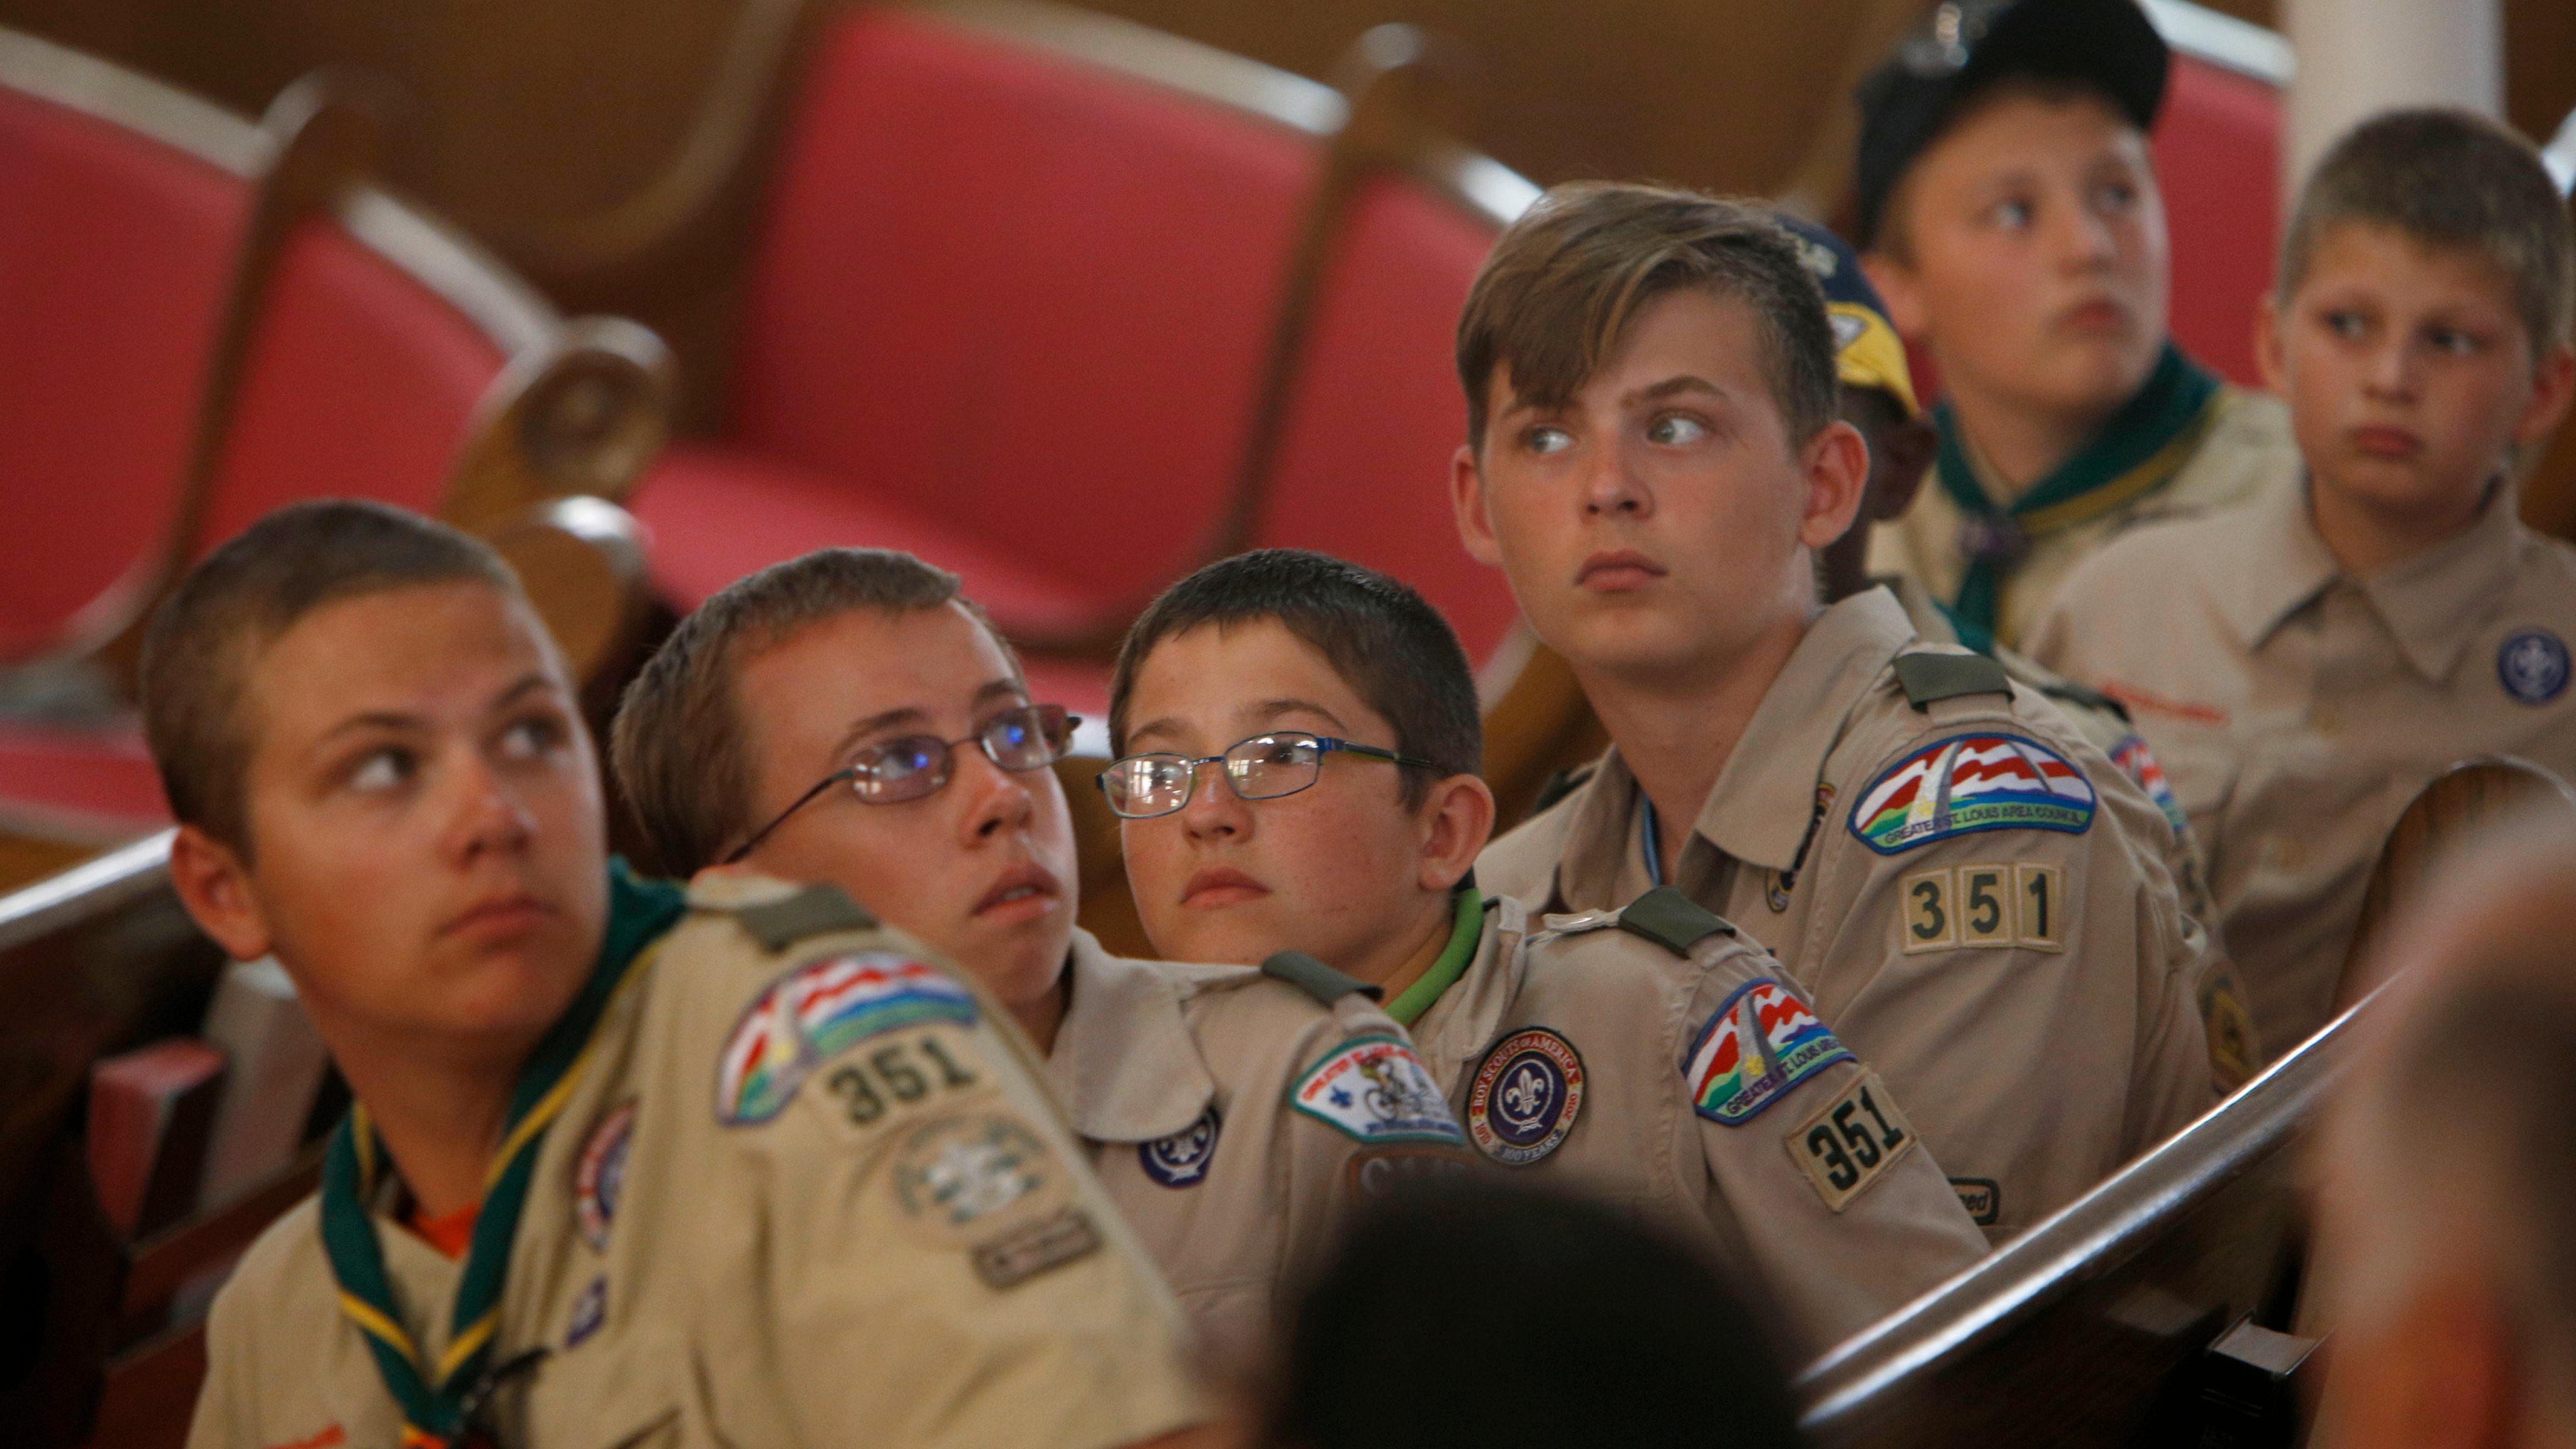 Boy scouts from Troop 351, St Charles, Missouri visit the Sixte